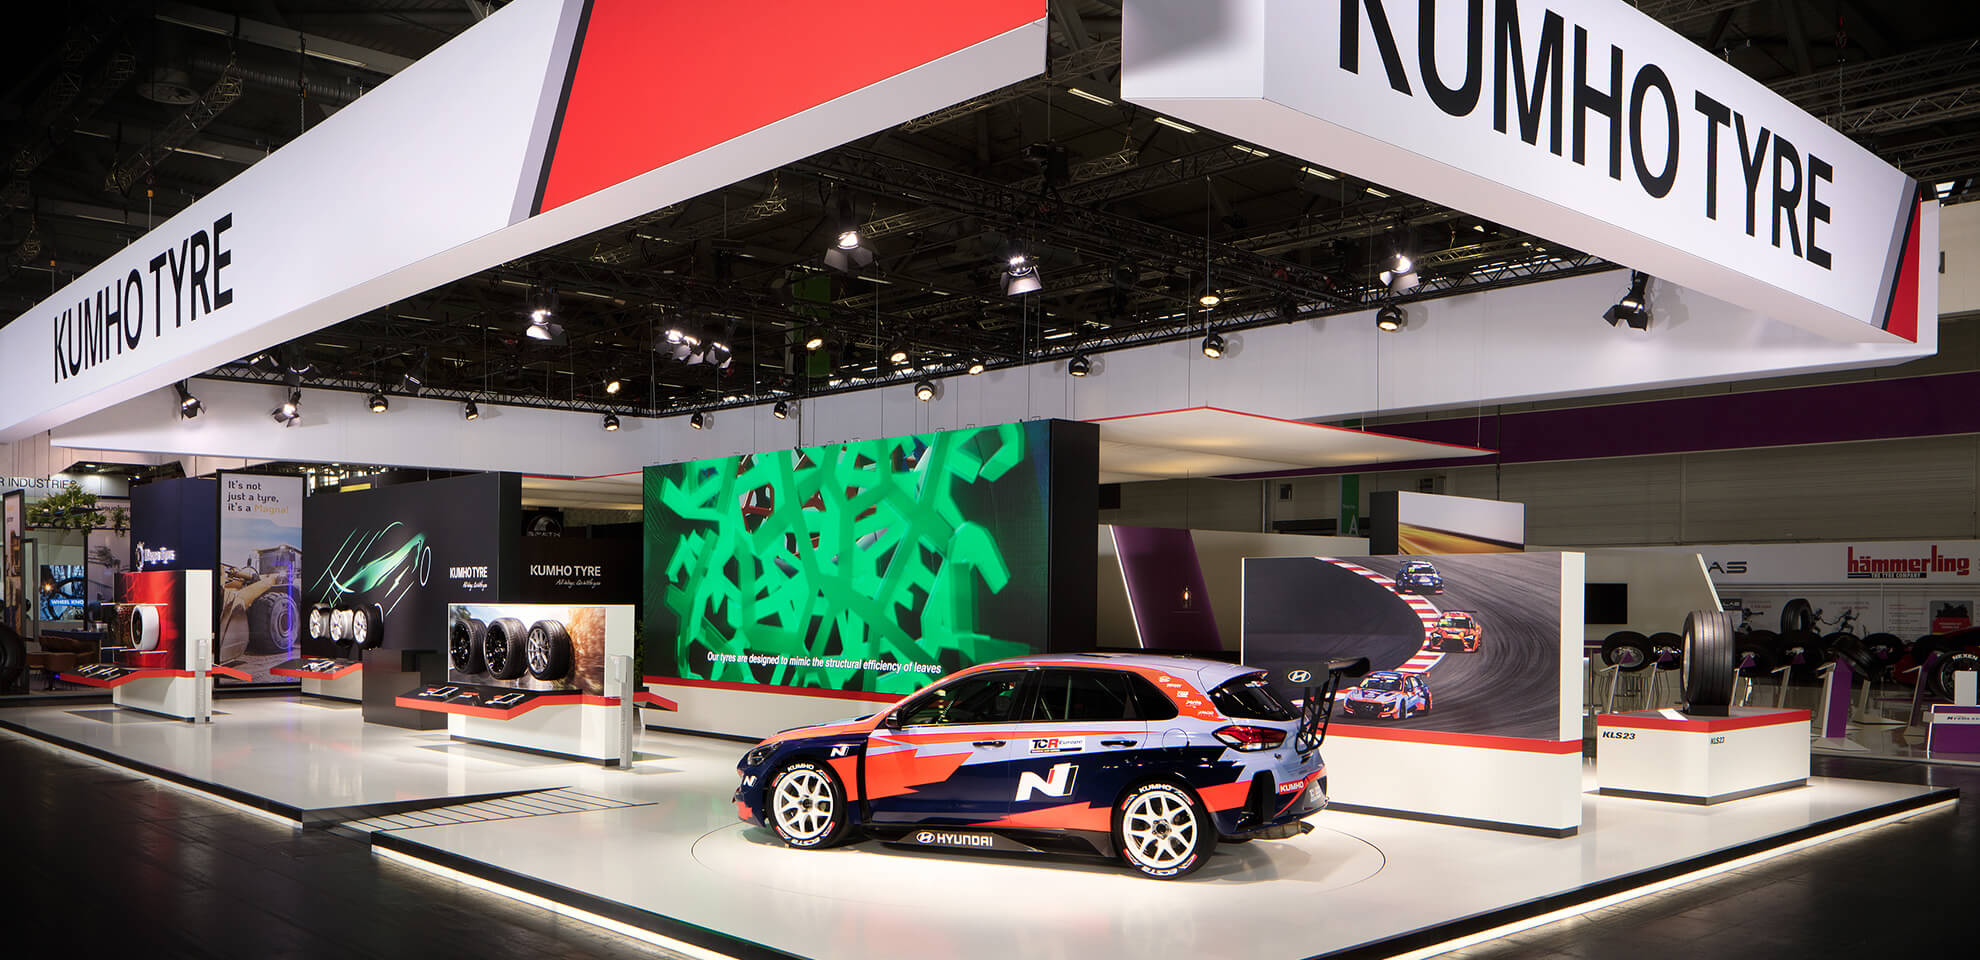 Exhibition booth for Kumho Tyre at The Tire Cologne 2022 DISPLAY